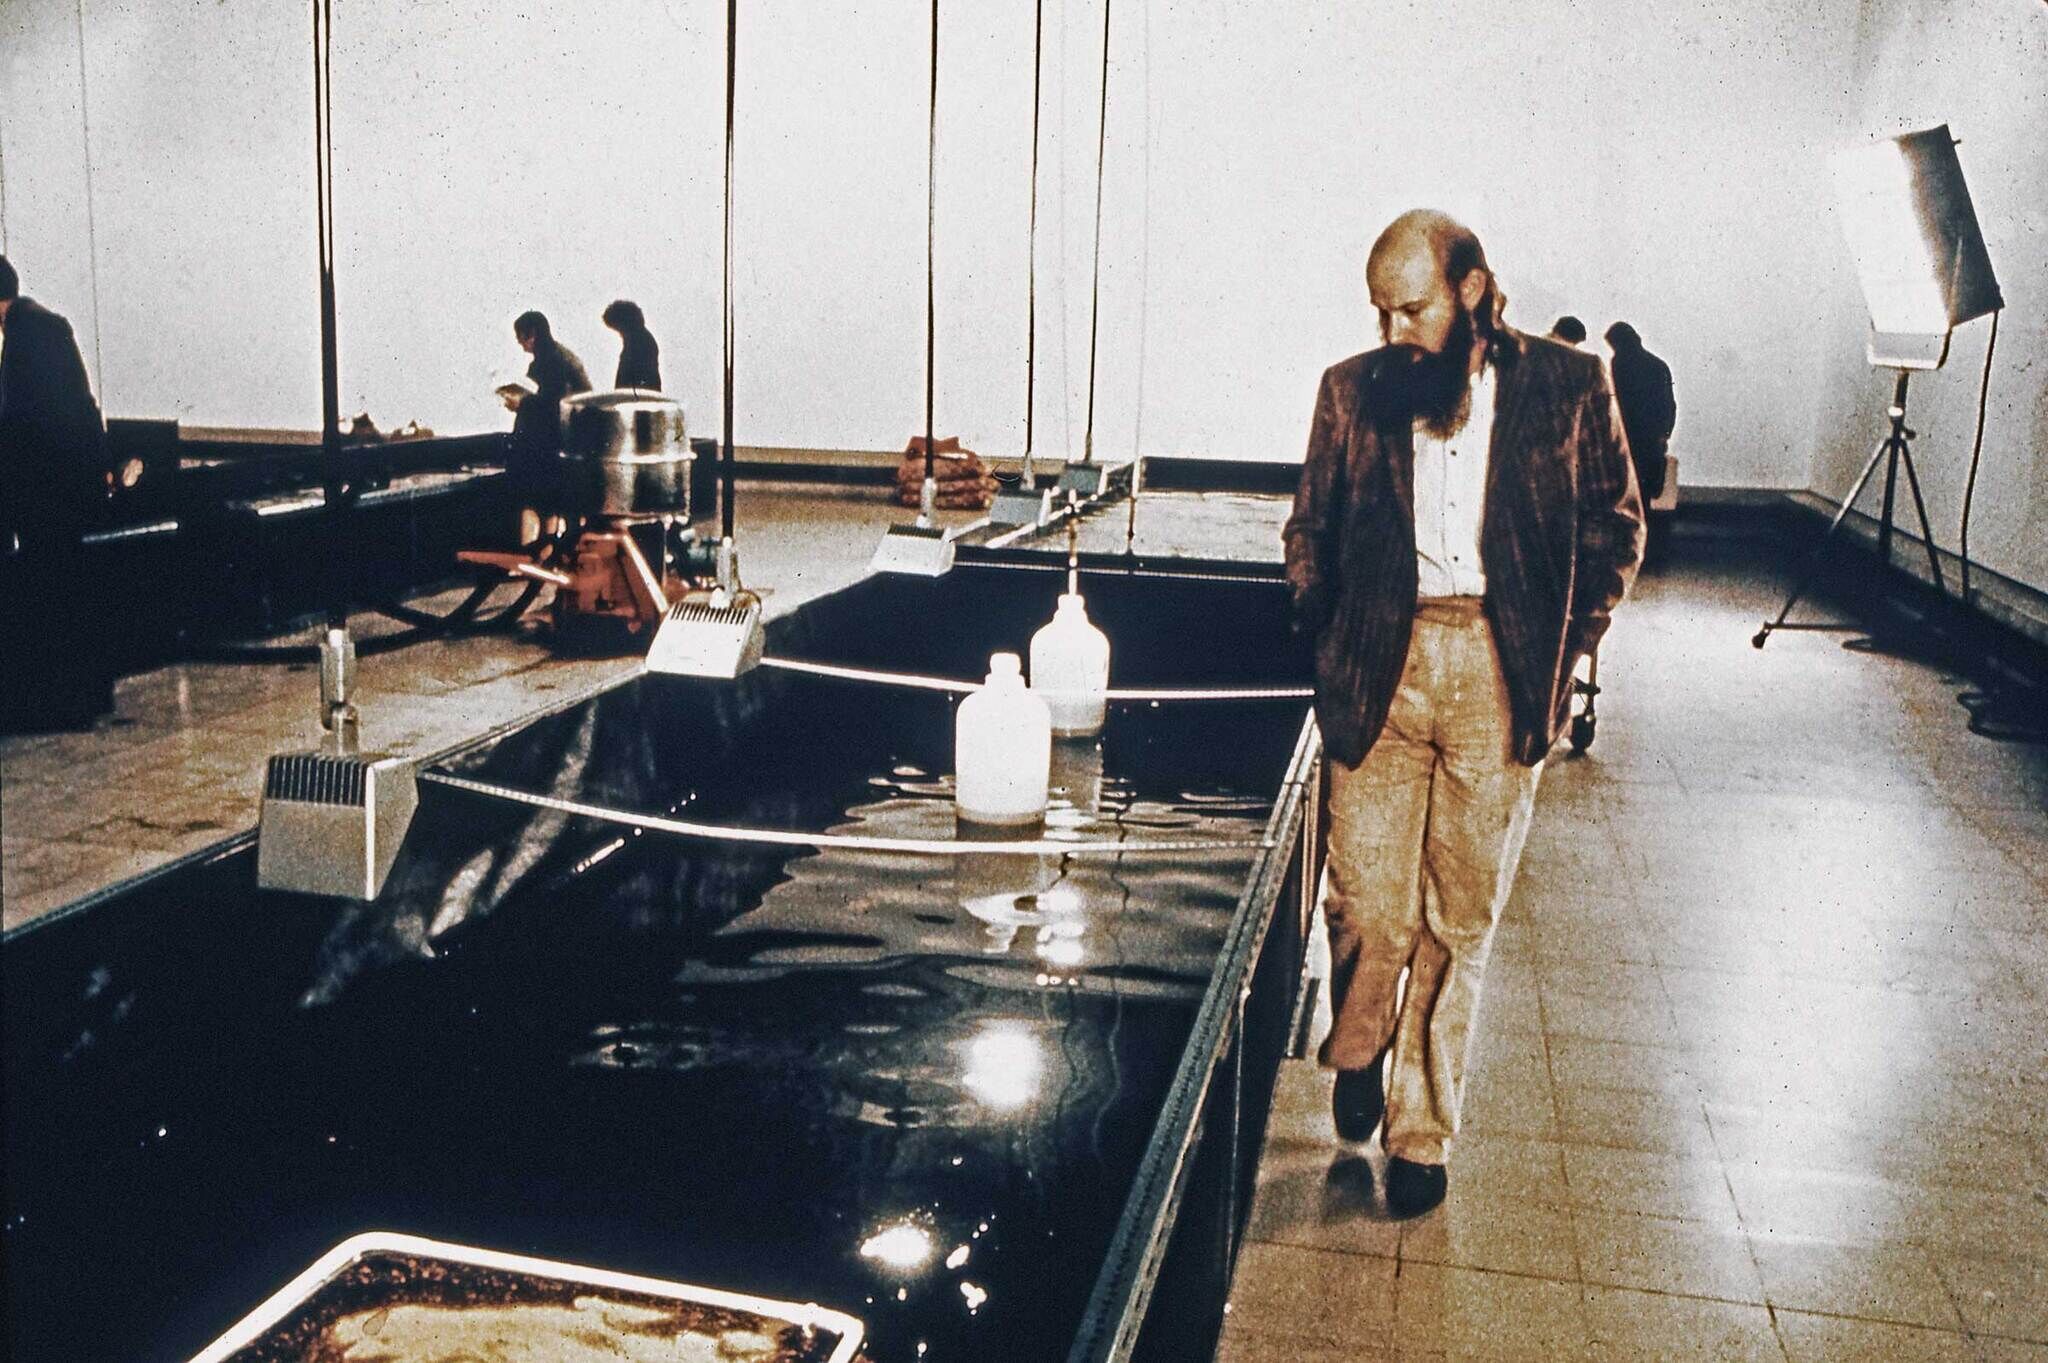 A man with a beard walks beside a series of water tanks in a gallery, with other people in the background.